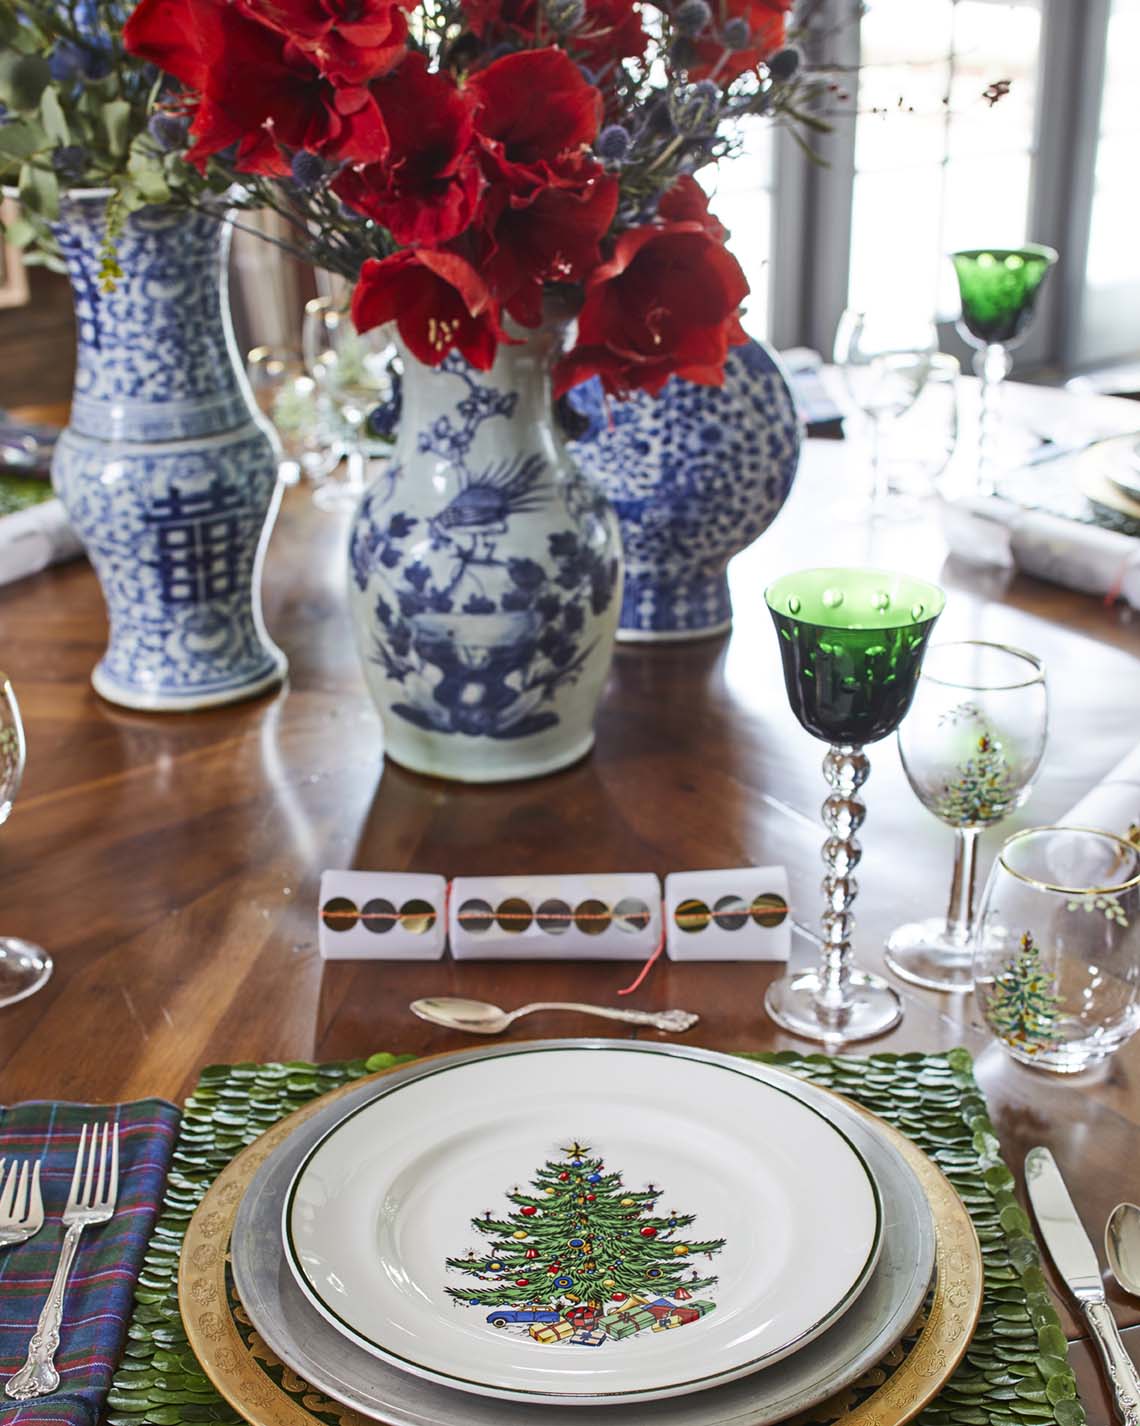 A table set with Christmas tree-themed china and green glass goblets